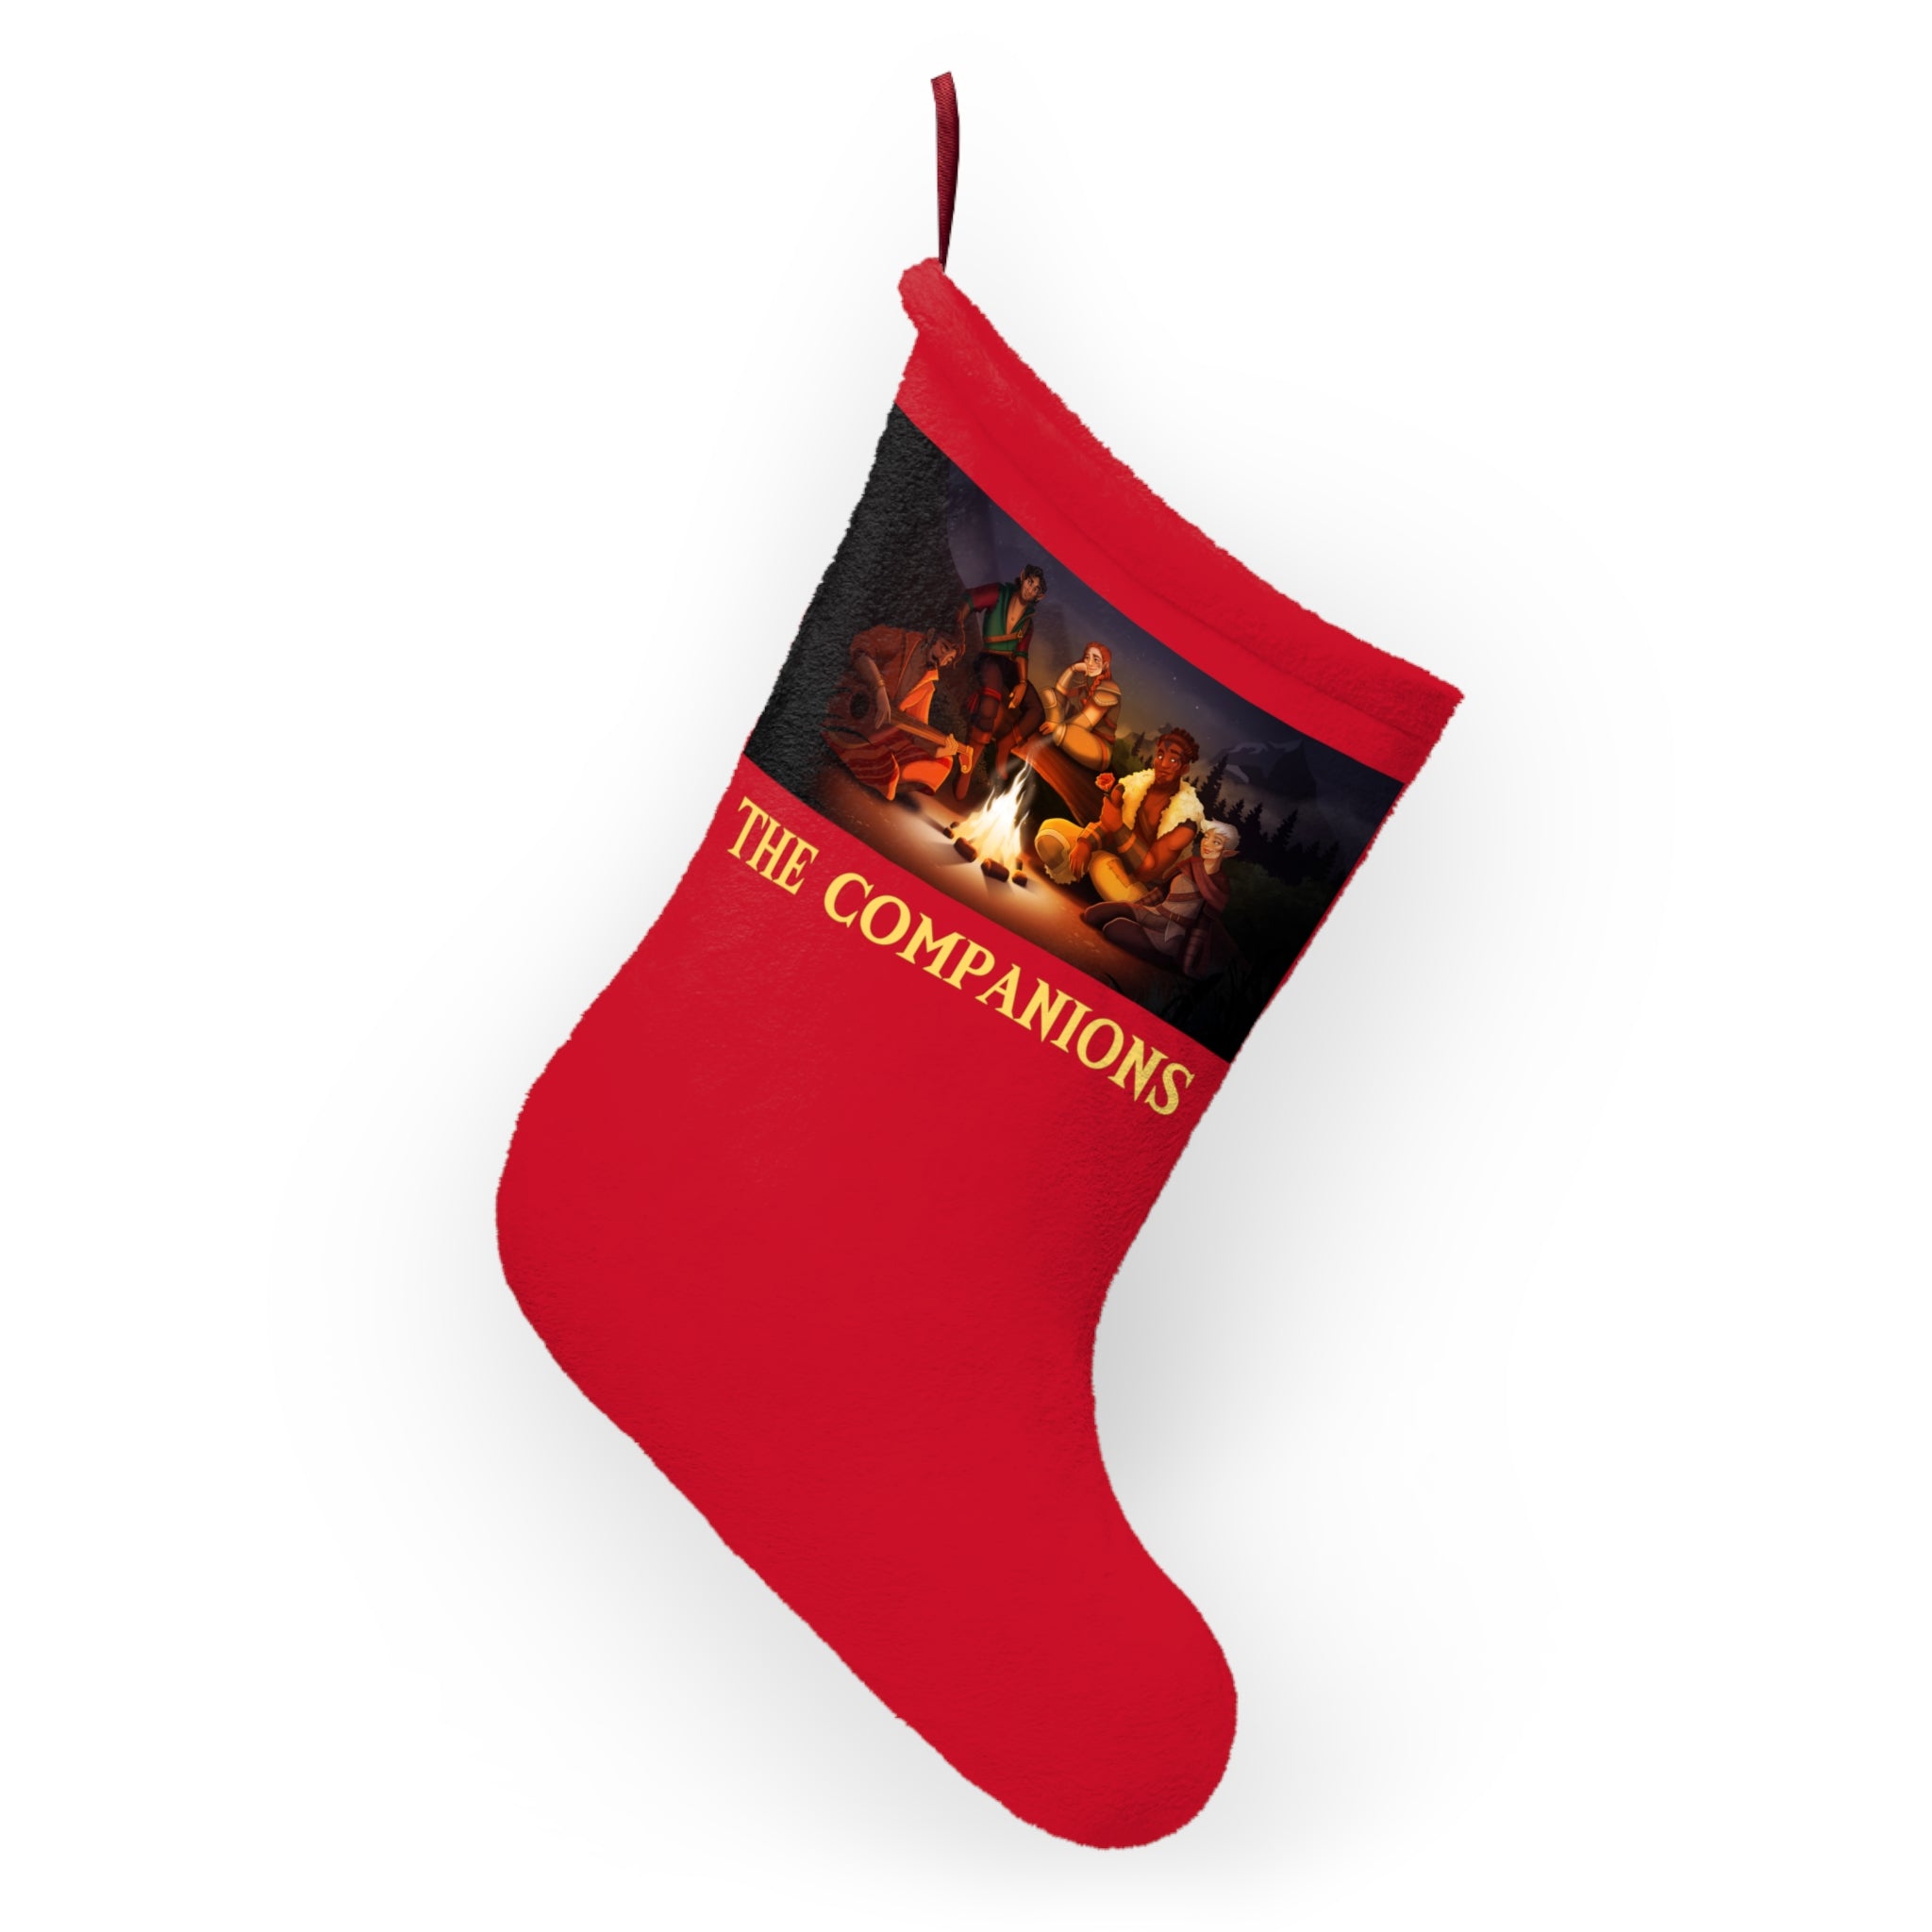 The Companions Campsite Christmas Stocking - Red